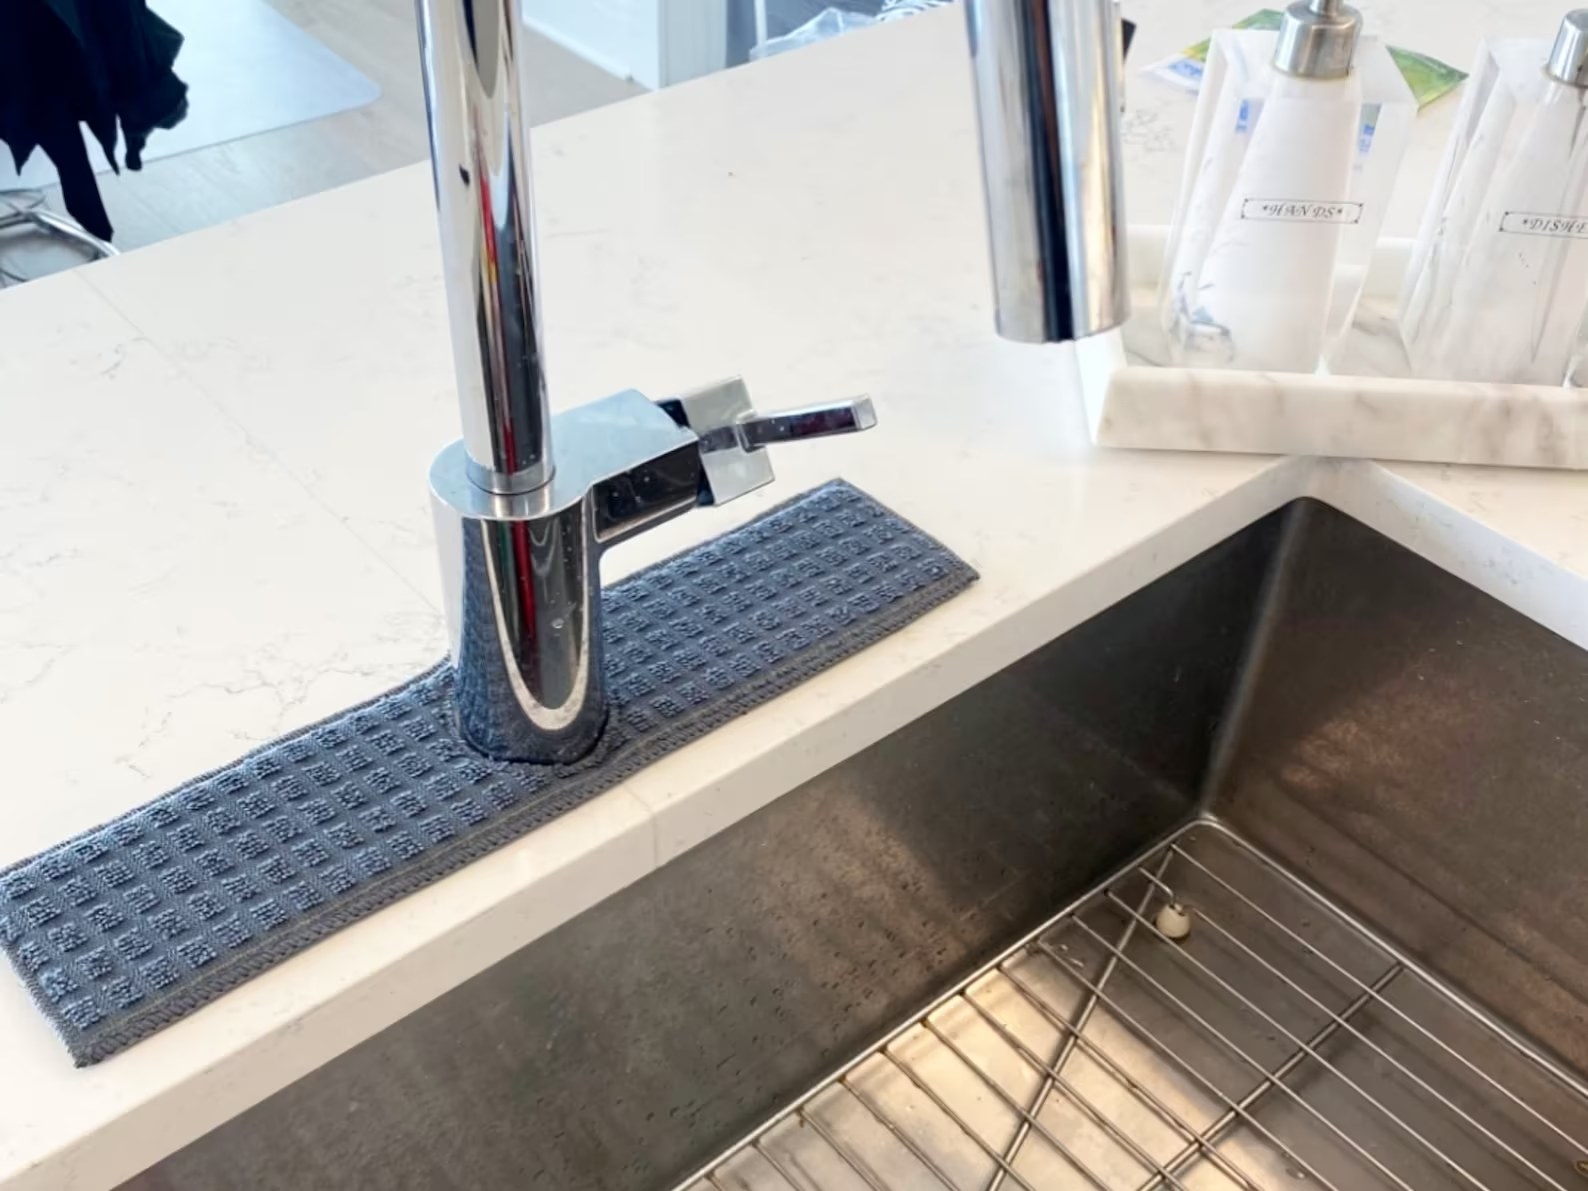 Absorbent gray rectangle of fabric placed around the base of a kitchen sink faucet